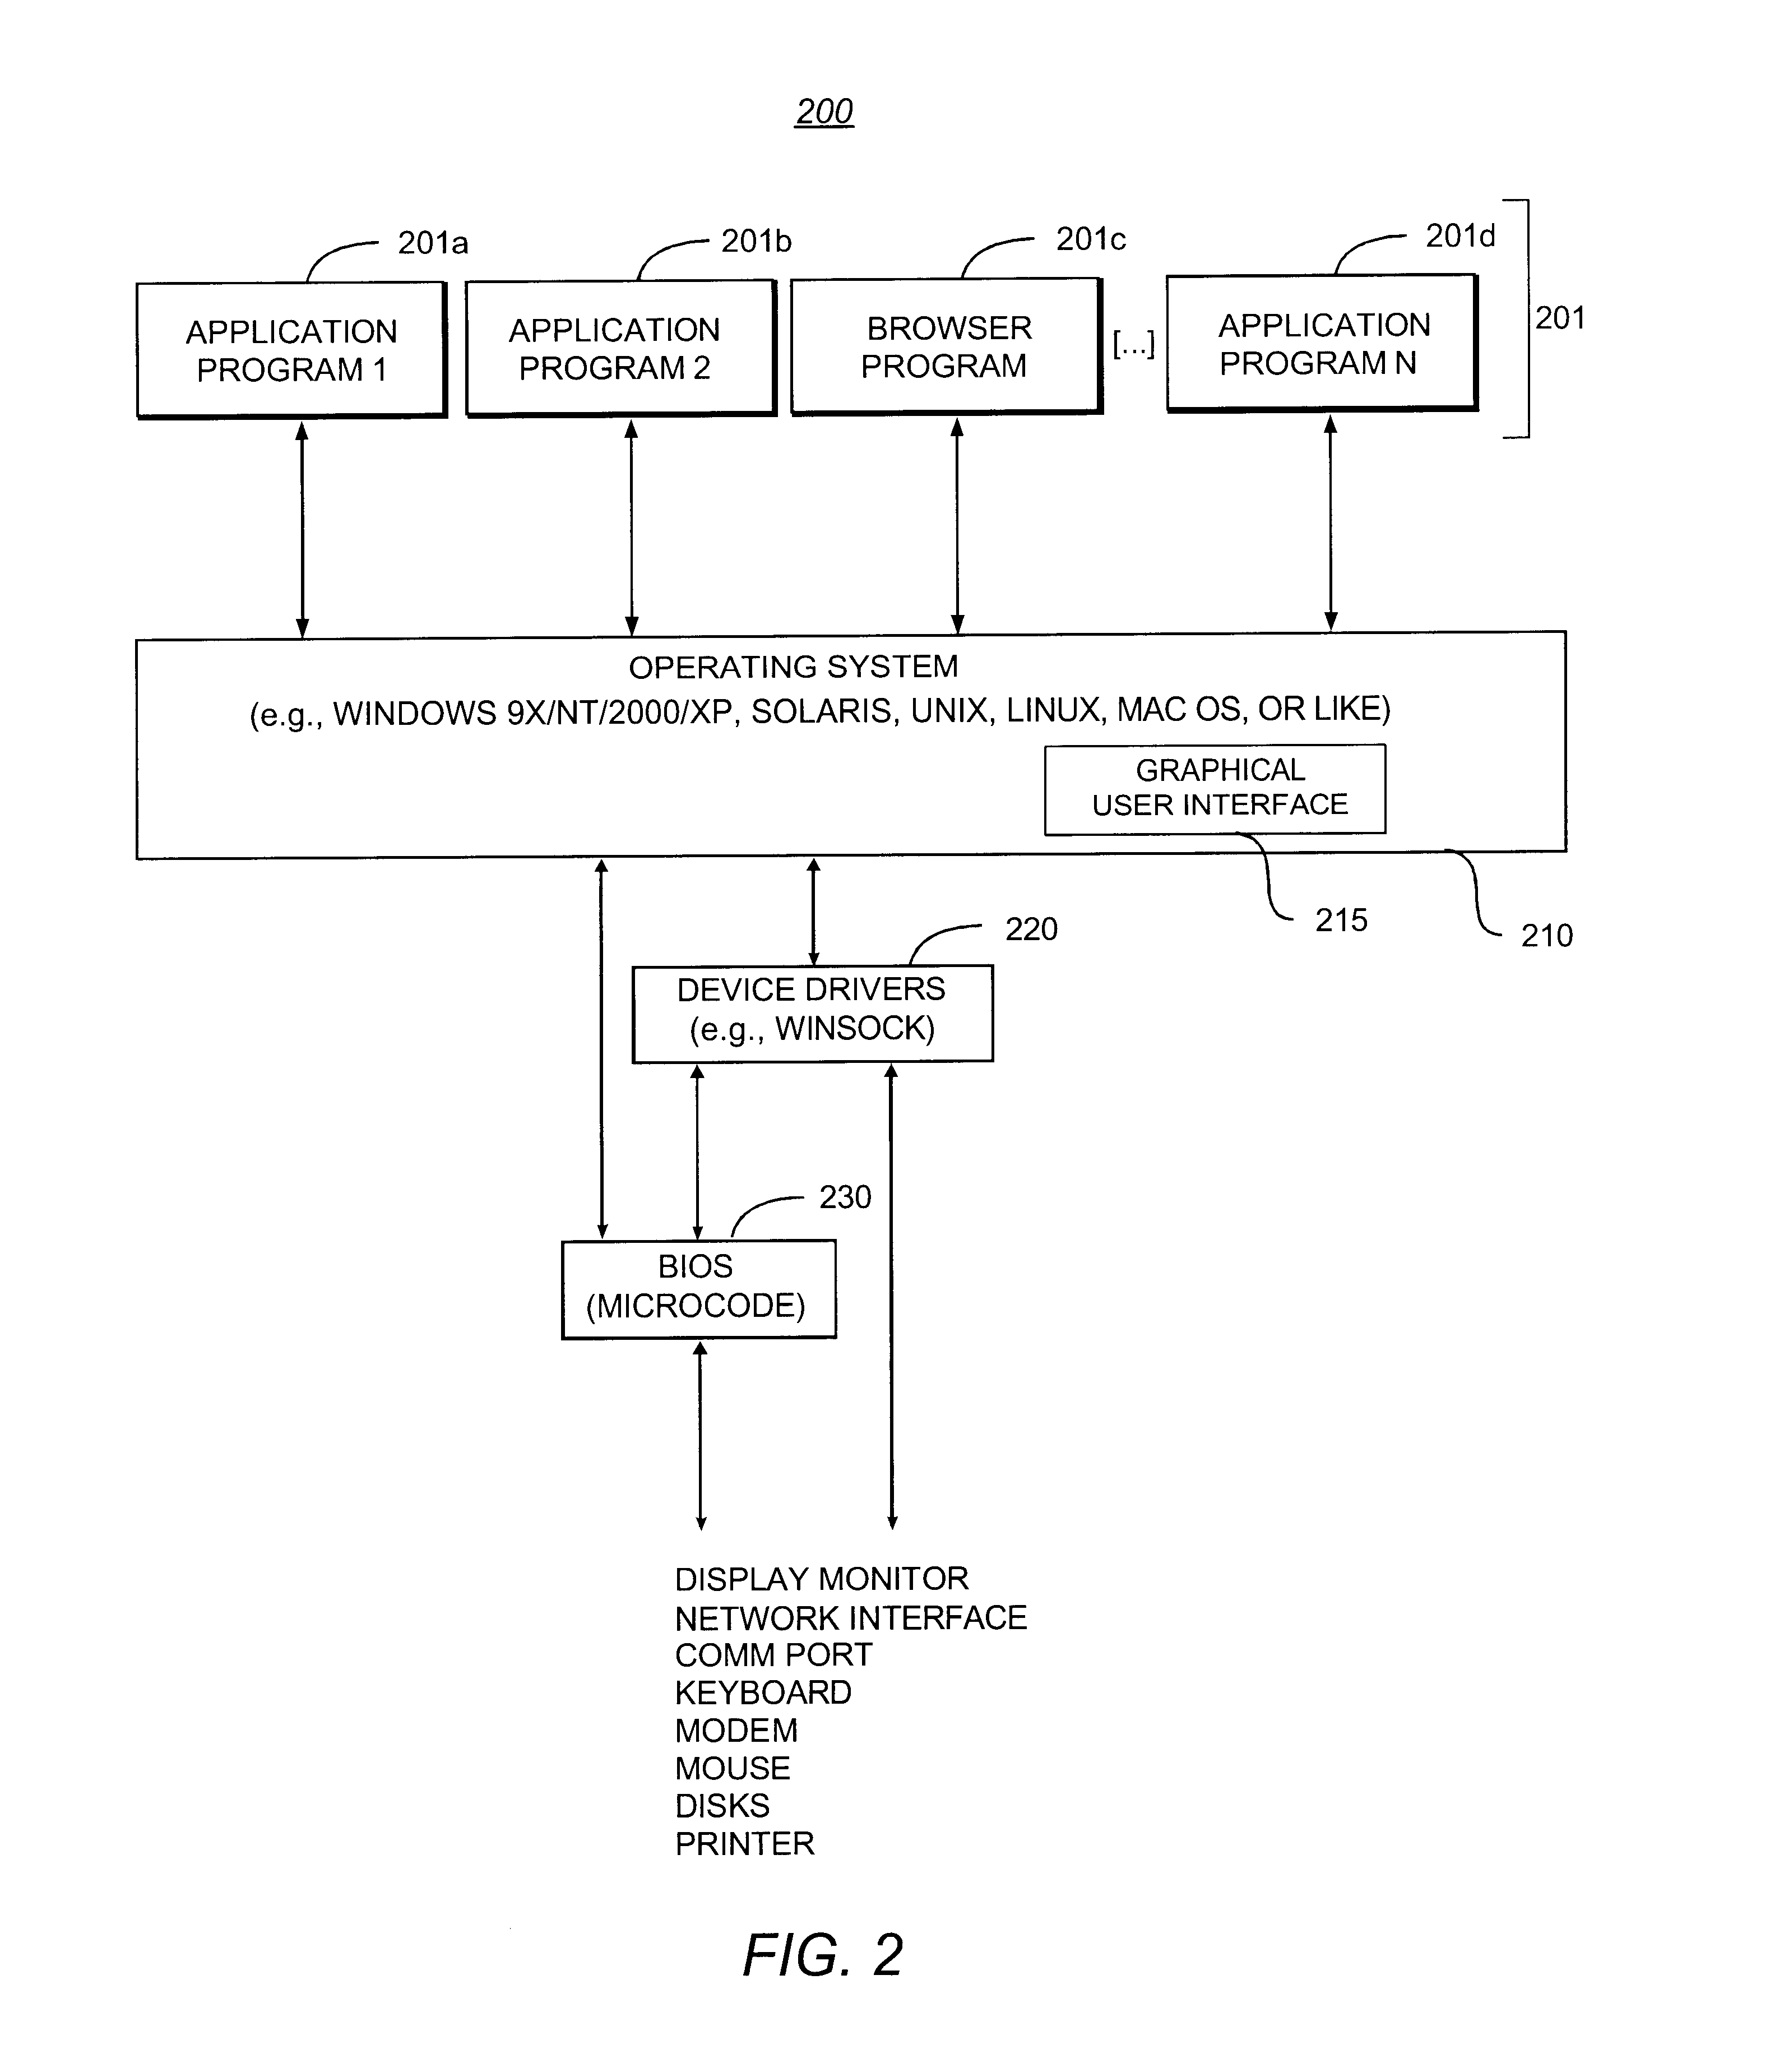 System and methodology for providing compact B-Tree